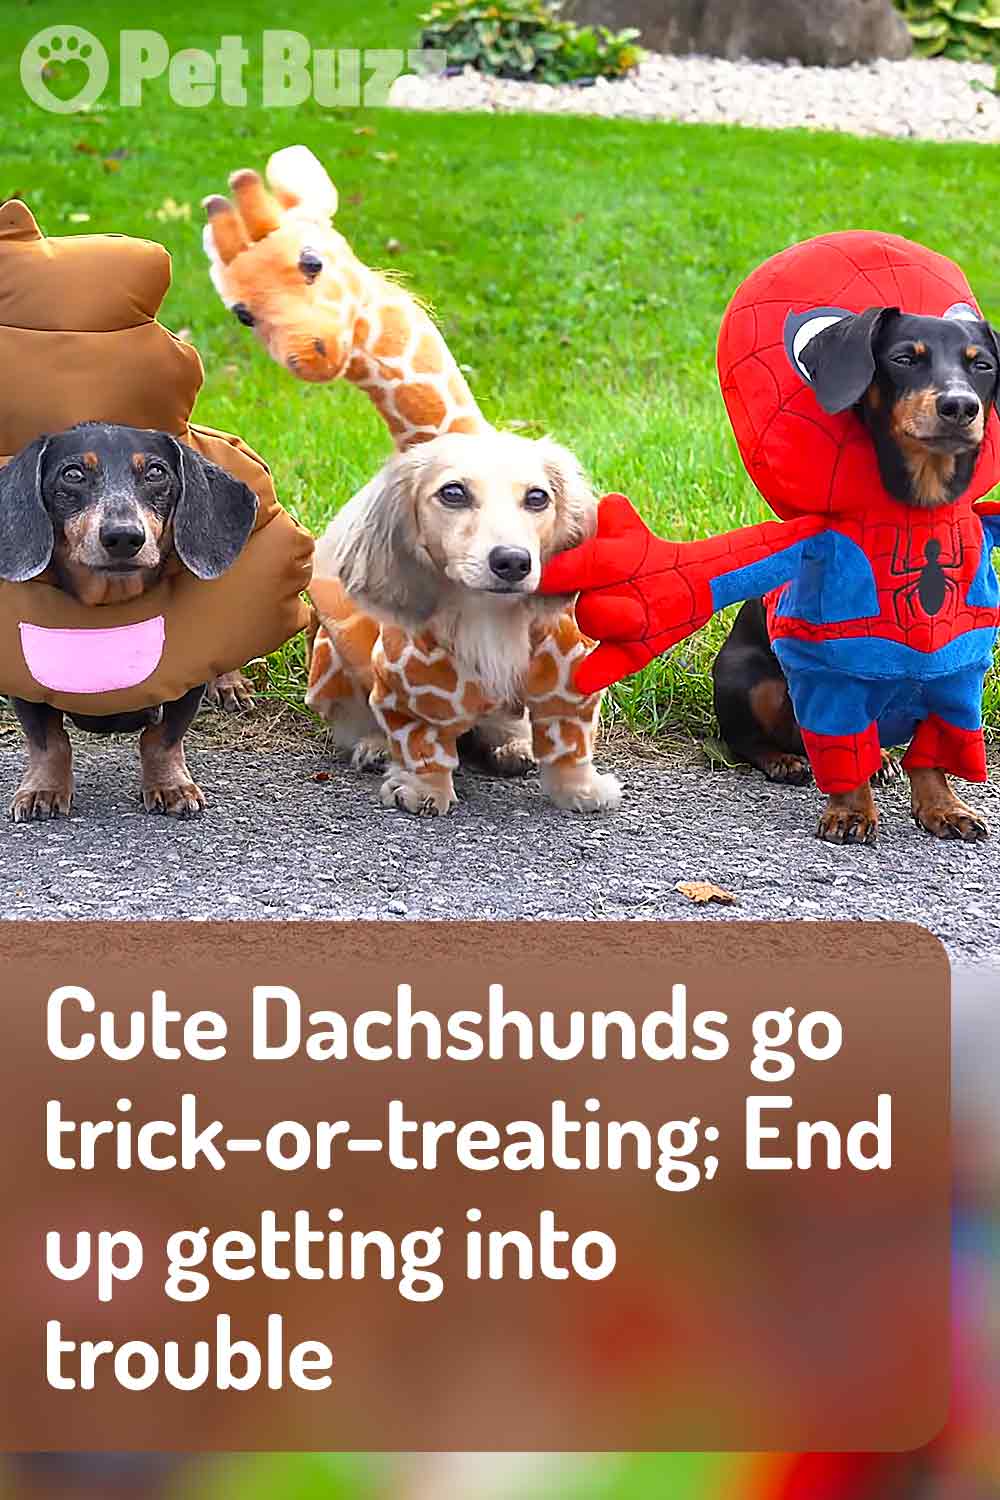 Cute Dachshunds go trick-or-treating; End up getting into trouble